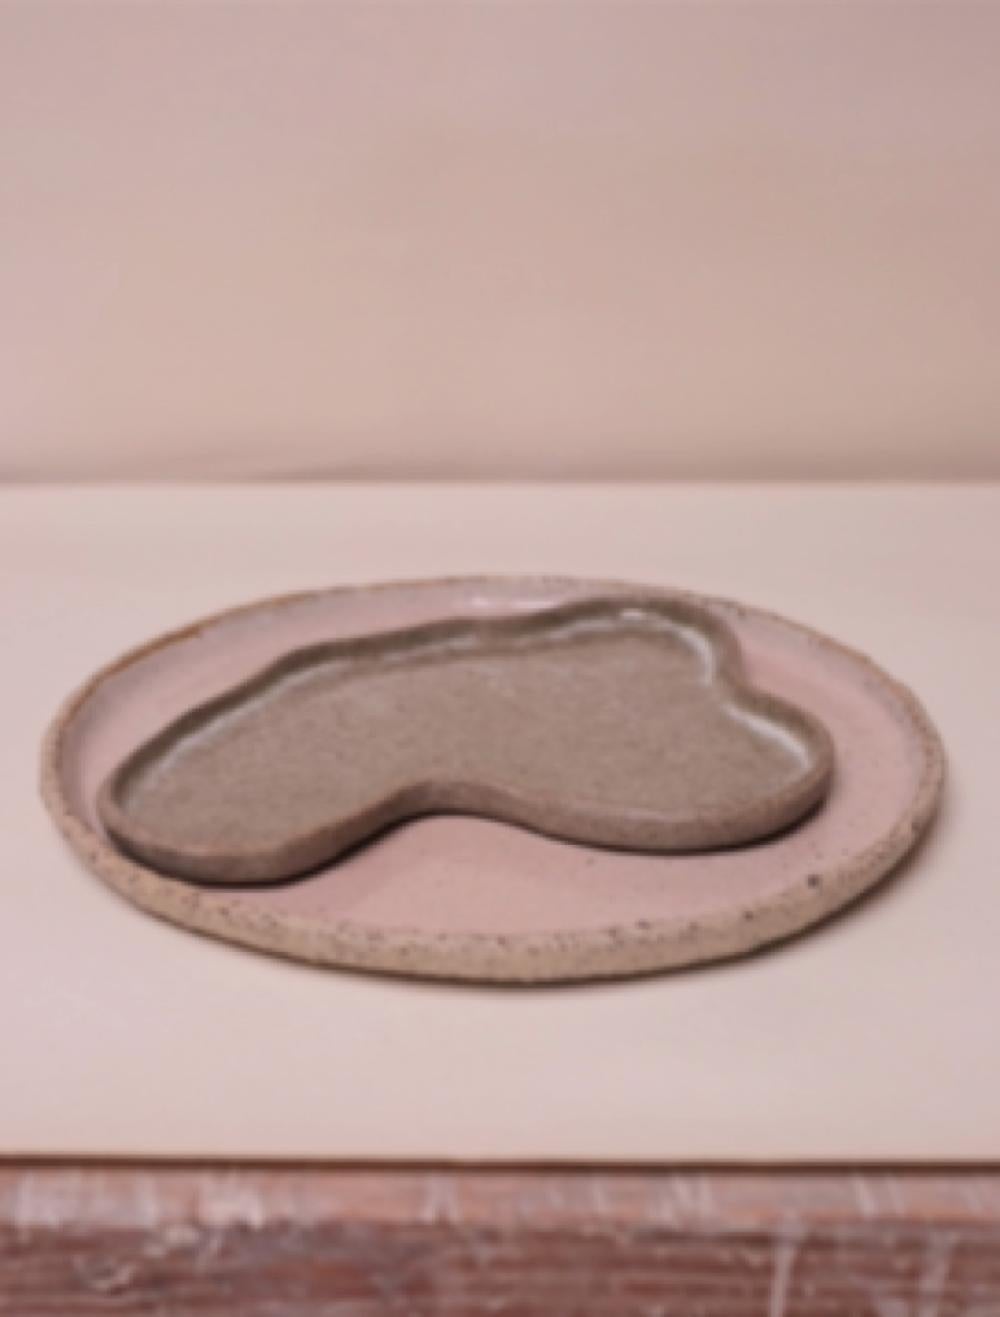 Hand-Crafted Puddle Plate in Speckled Grey Clay and Sheer Glaze, Medium